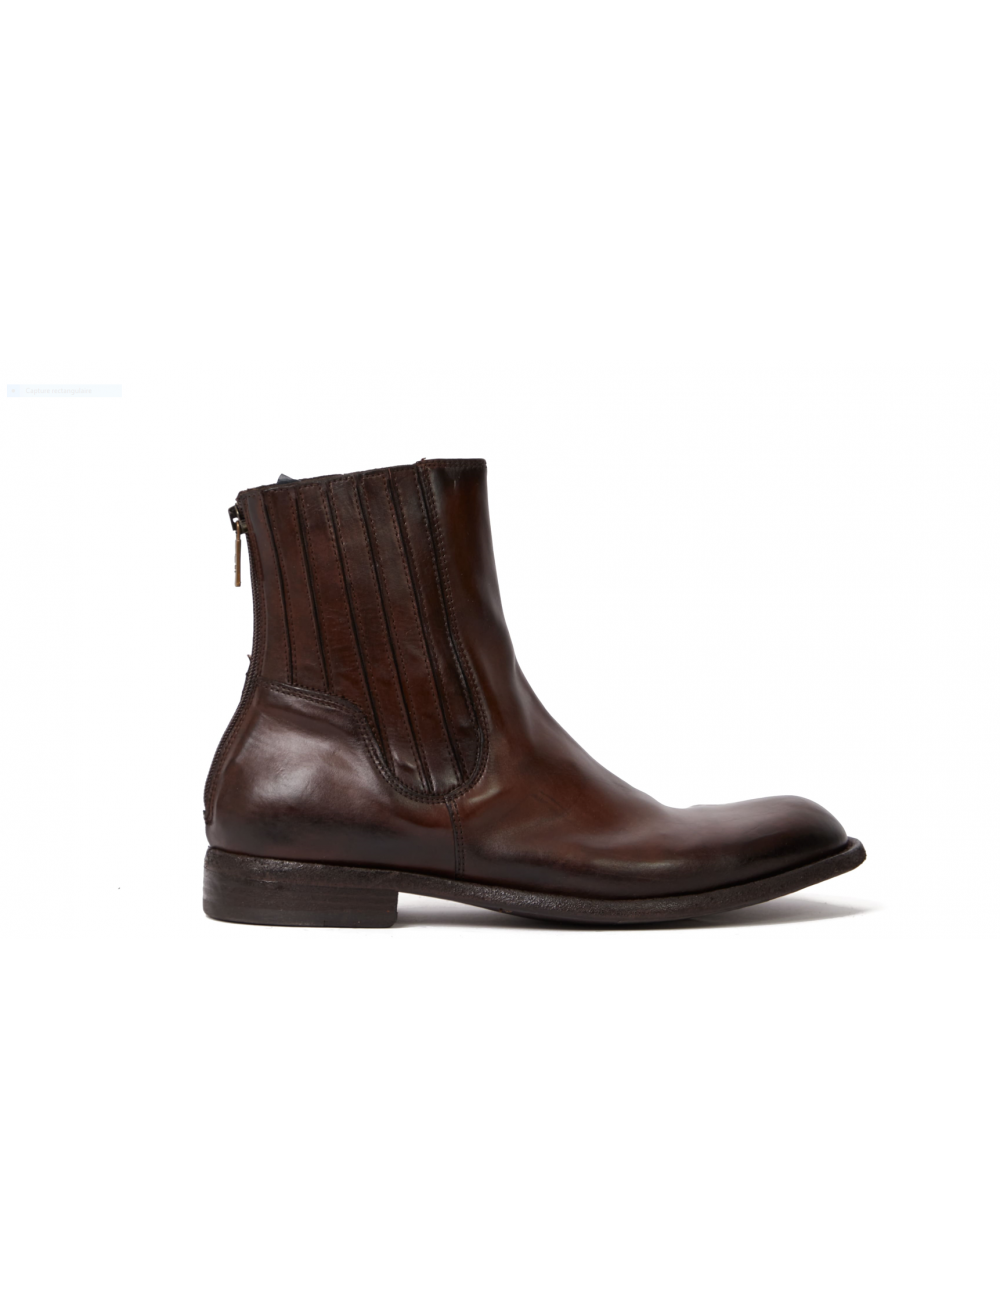 Men's ankle boot in brown...